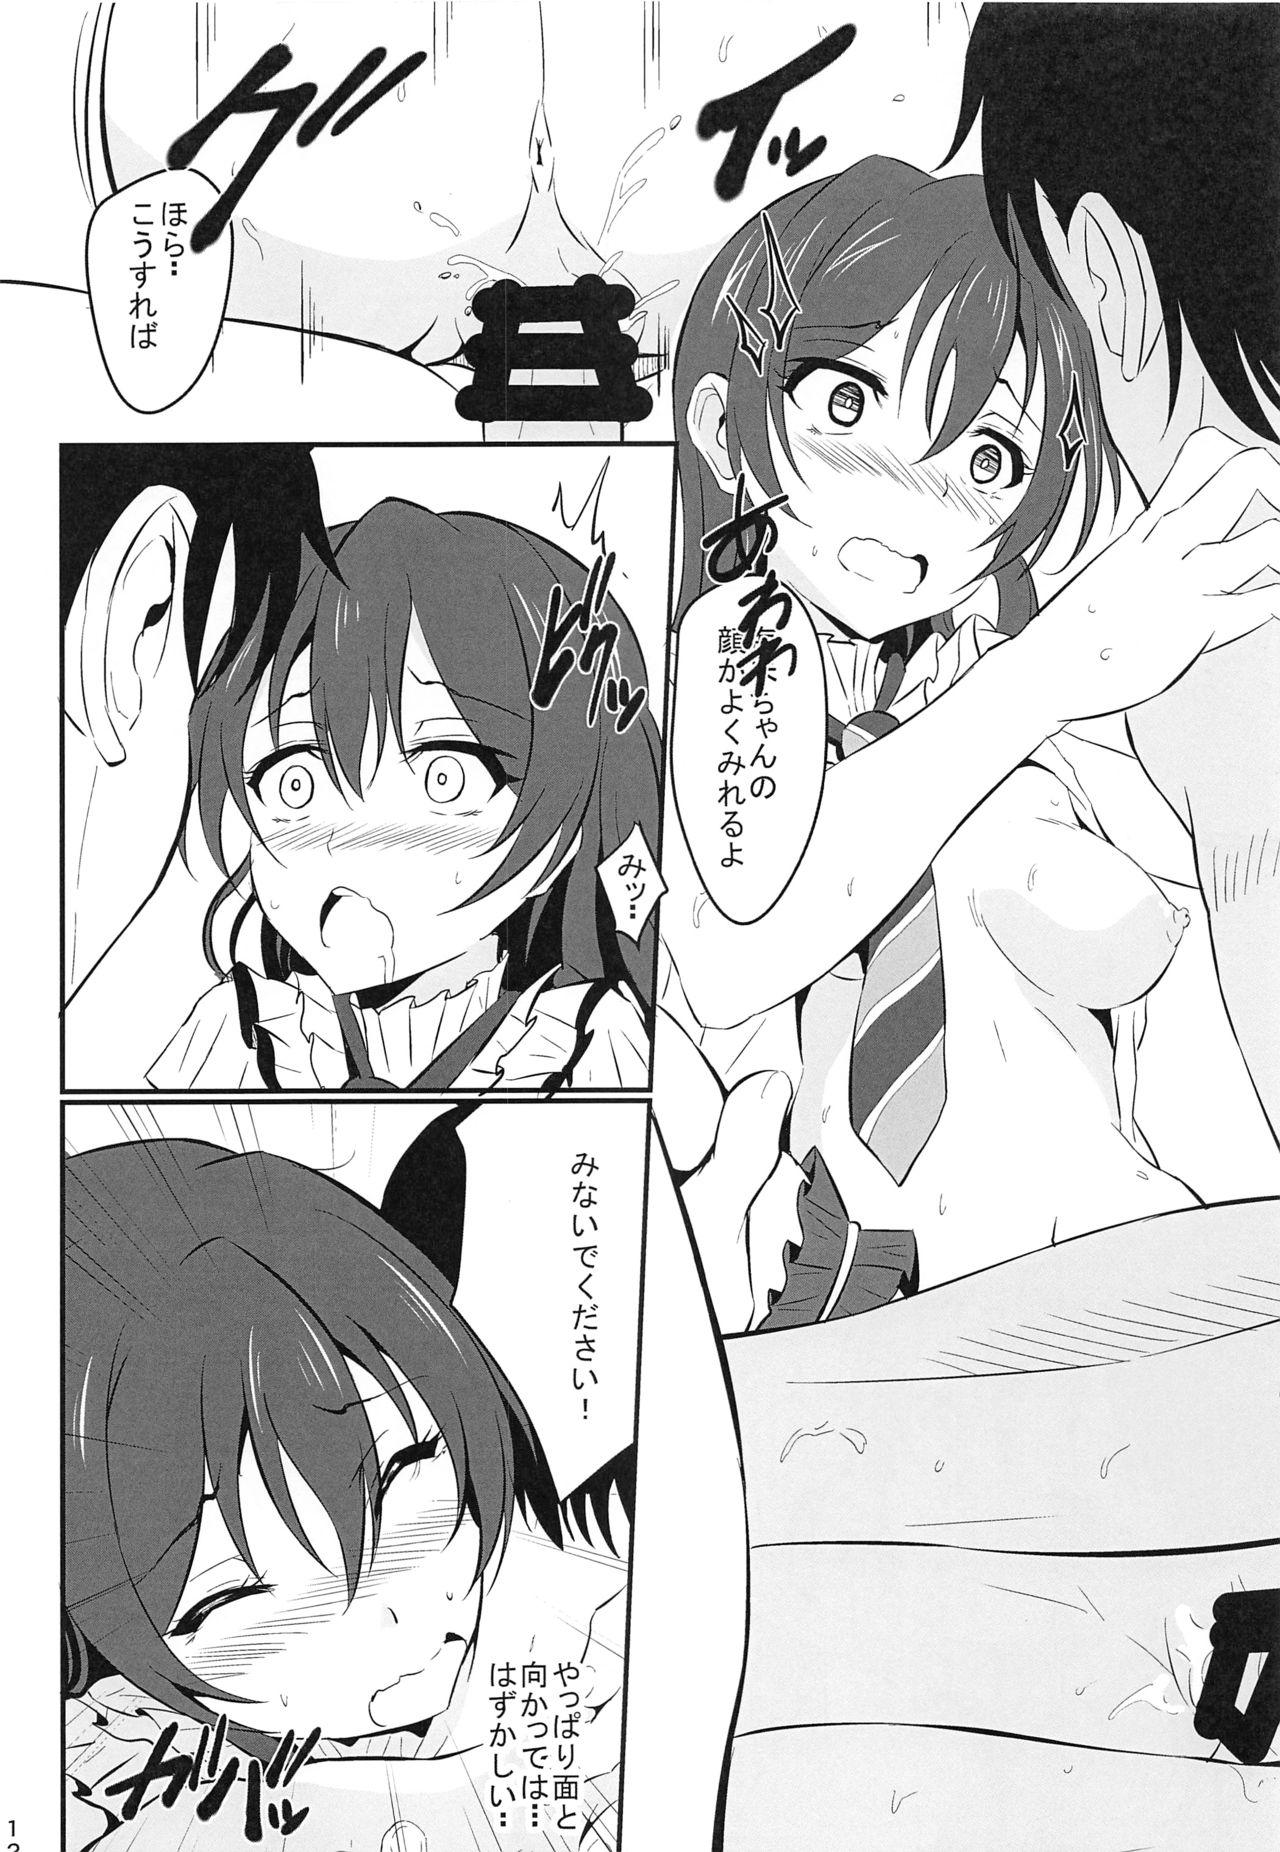 Perfect Body Umi LOVER - Love live Passion - Page 11